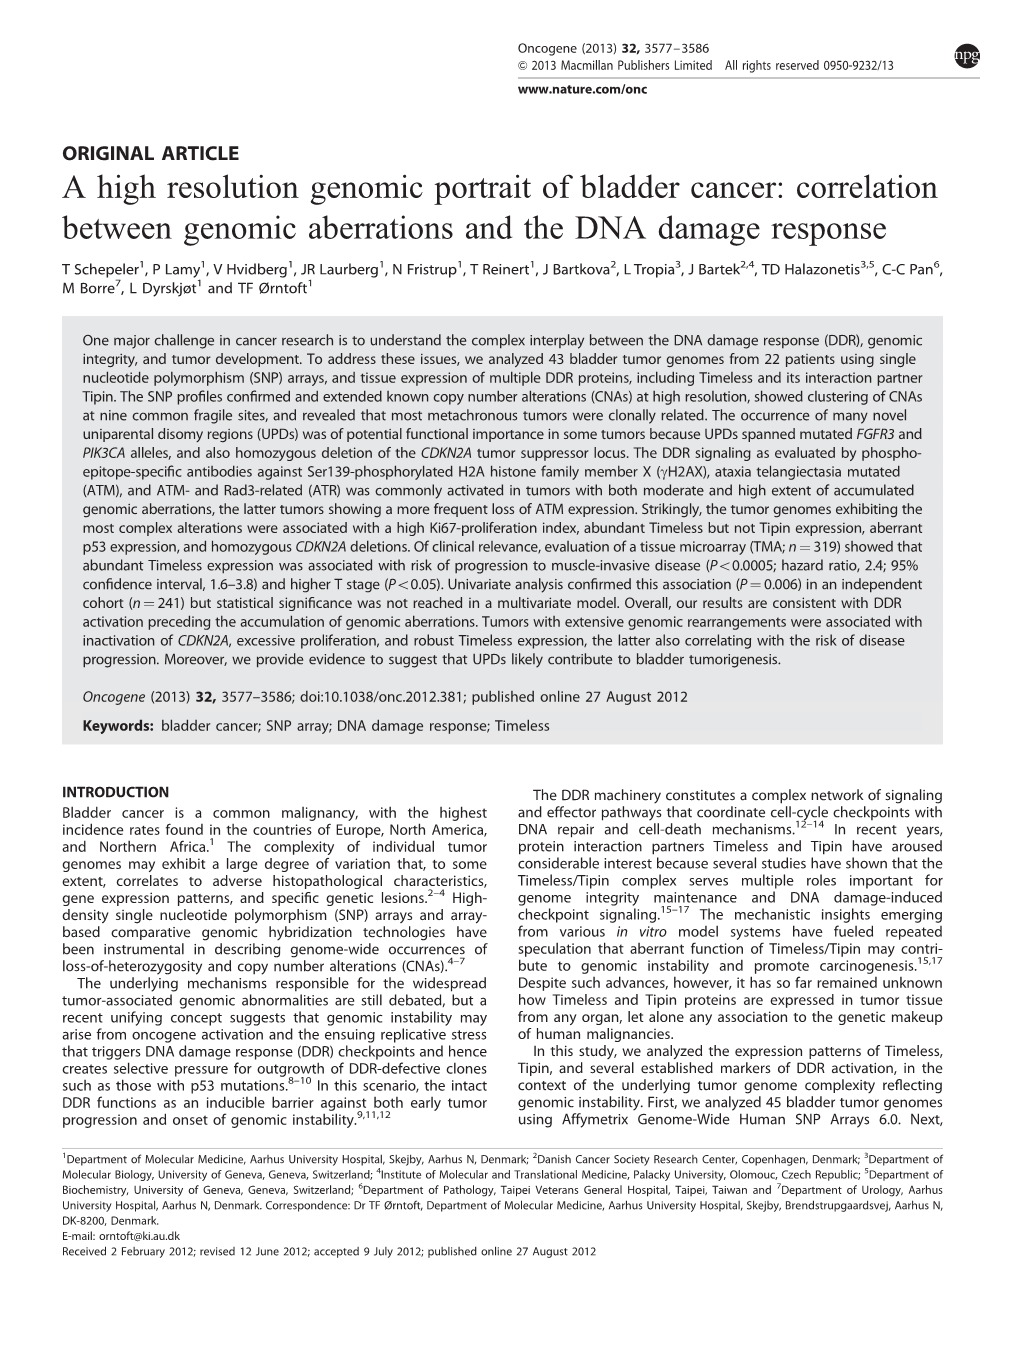 A High Resolution Genomic Portrait of Bladder Cancer: Correlation Between Genomic Aberrations and the DNA Damage Response